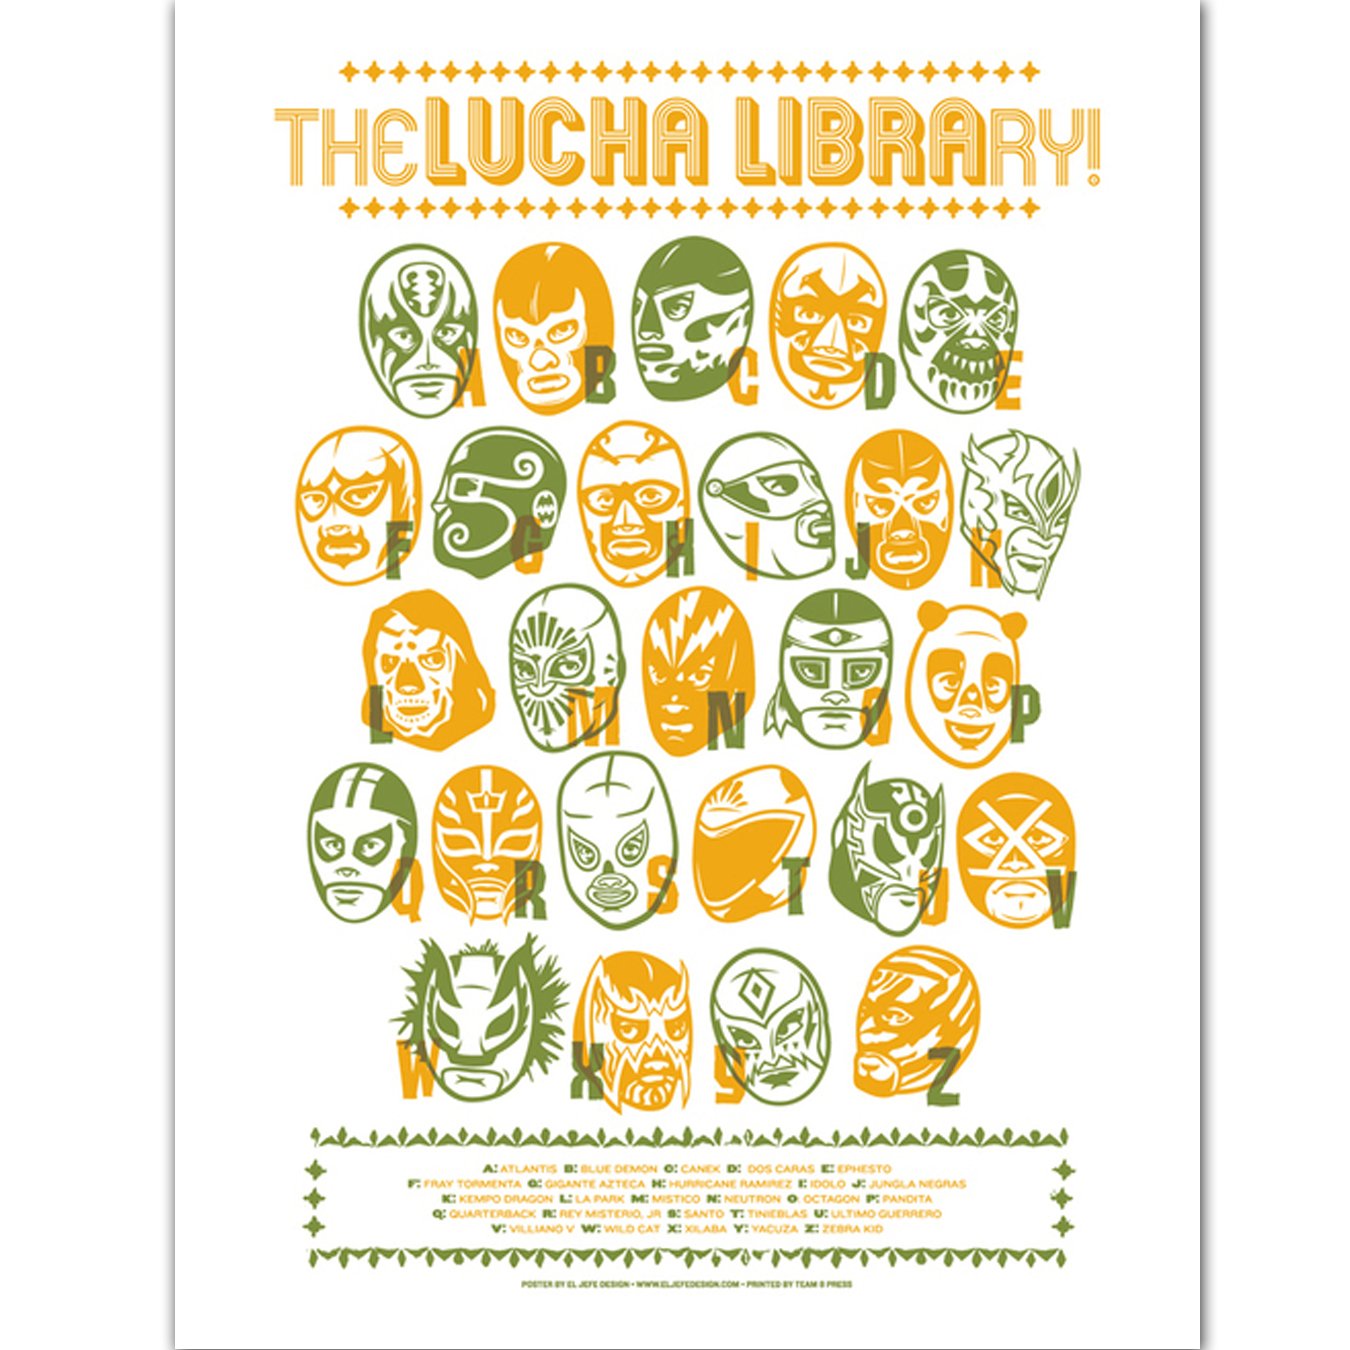 Image of Lucha Library poster by Rockets Are Red